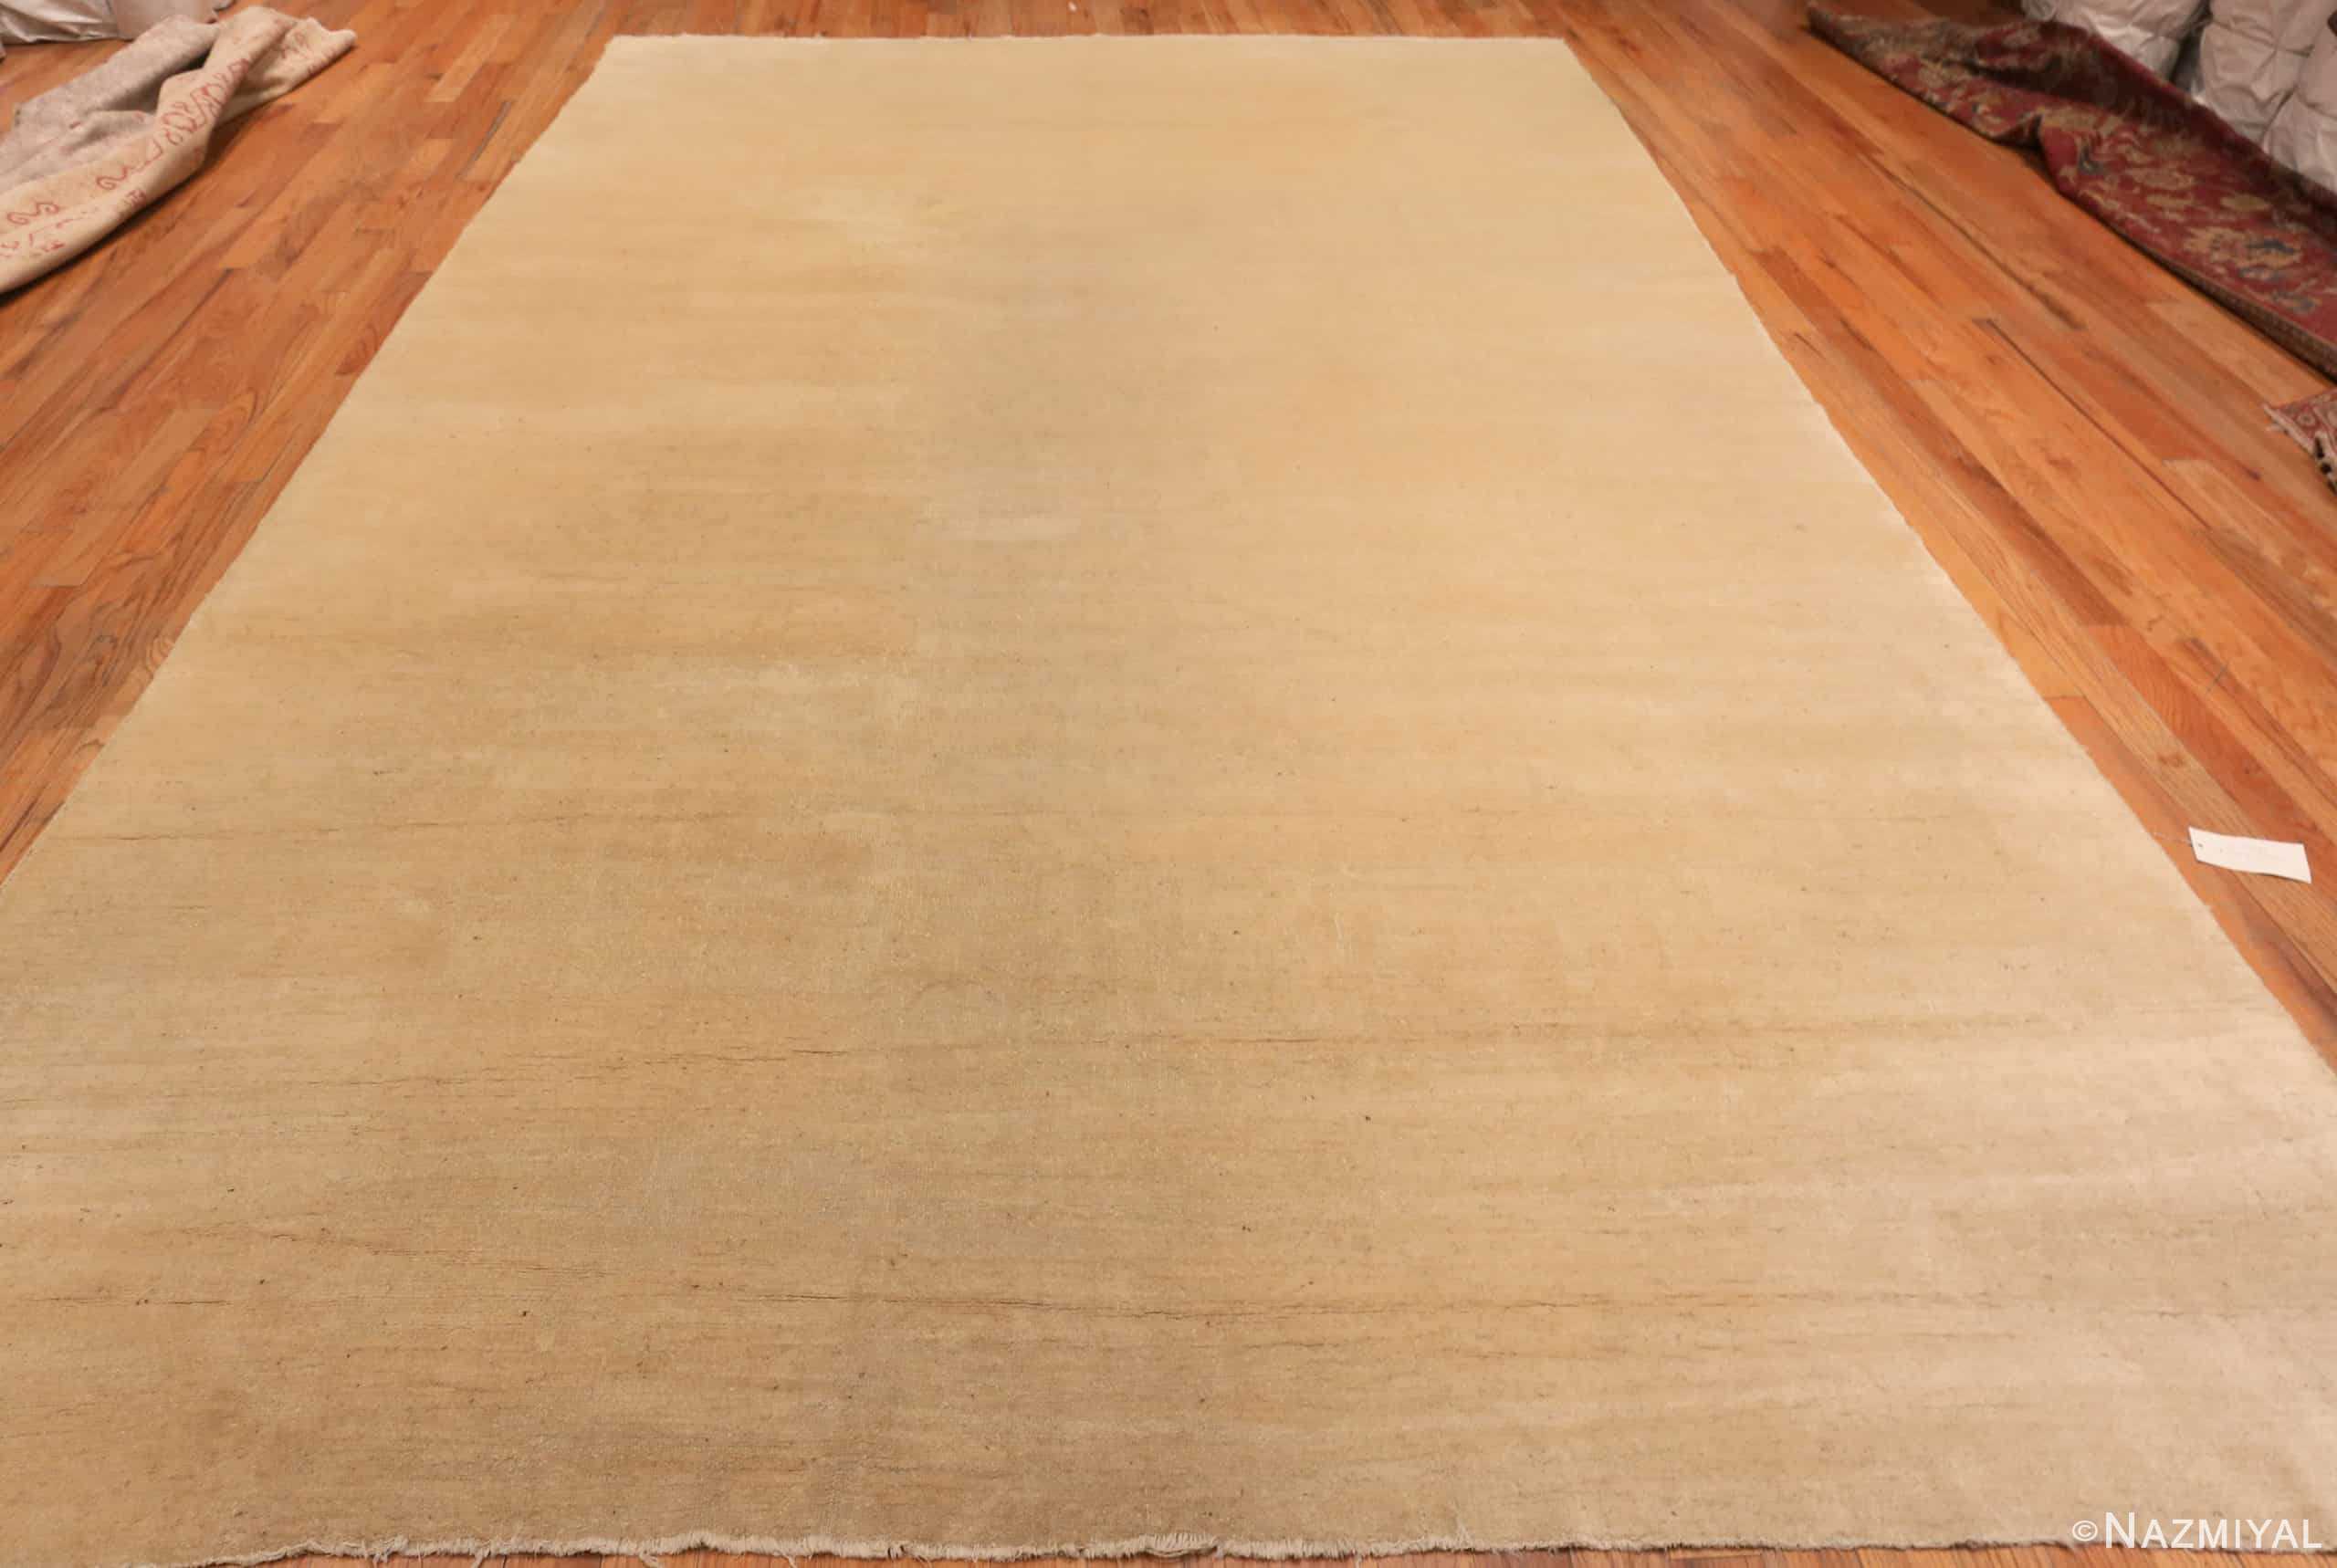 Whole View Of Solid Ivory Large Antique Chinese Rug 70843 by Nazmiyal Antique Rugs